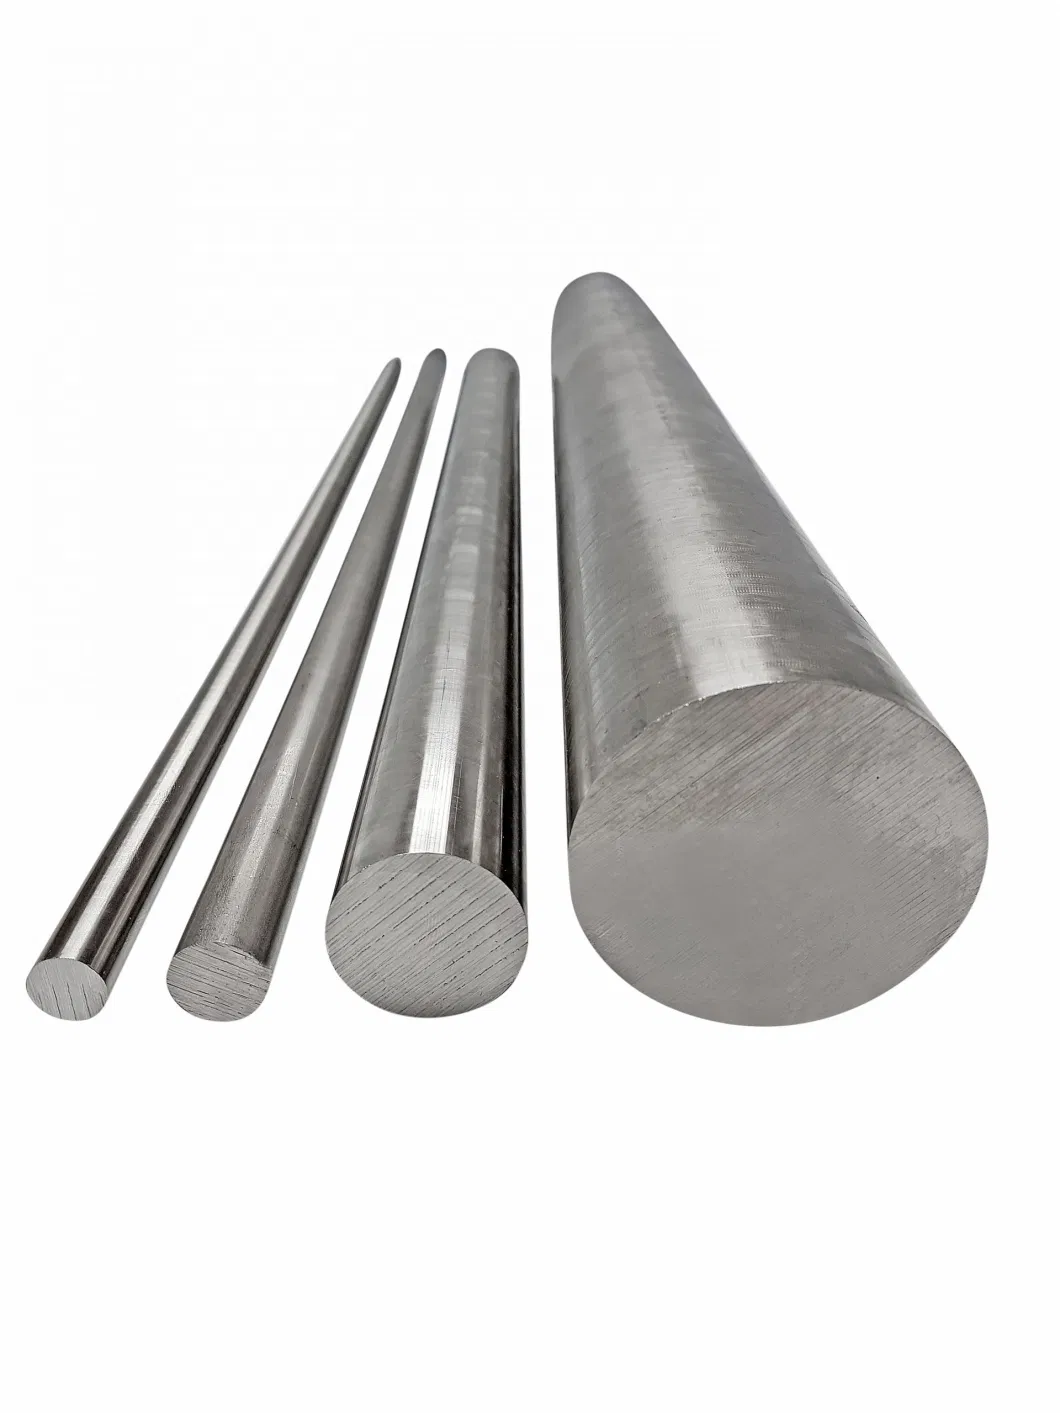 ASTM 904L 304 316 316L Hot Rolled Cold Drawn Stainless Steel Bar 8mm Inox 201 Ss Round Rod